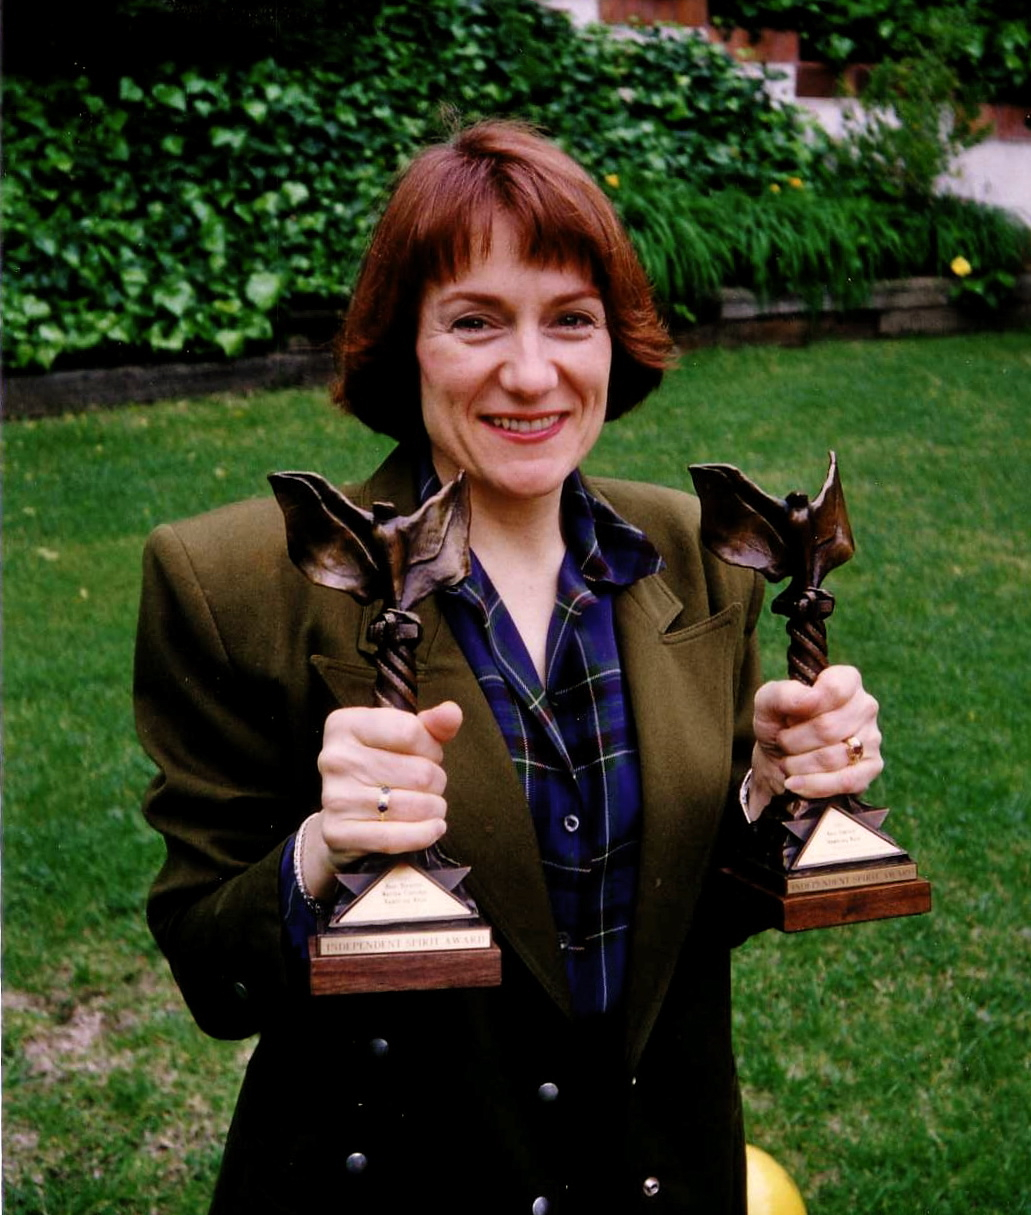 Martha Coolidge wins Best Director & Best Picture for RAMBLING ROSE, IFP Spirit Awards, 1992